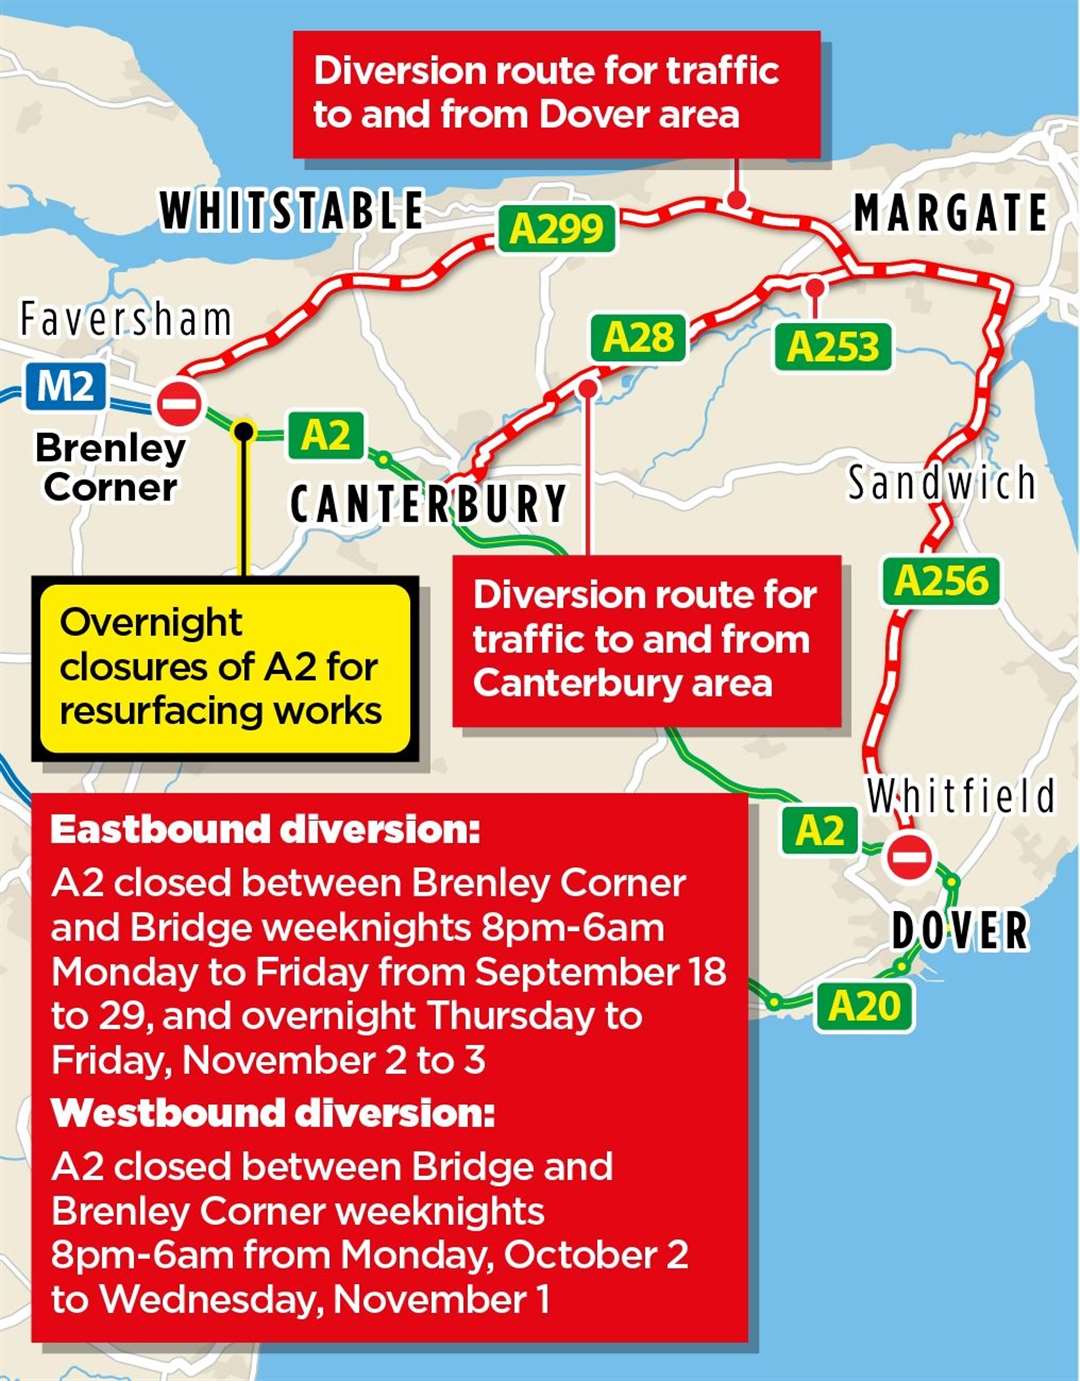 Details on the A2 road closures between September 18 and November 4